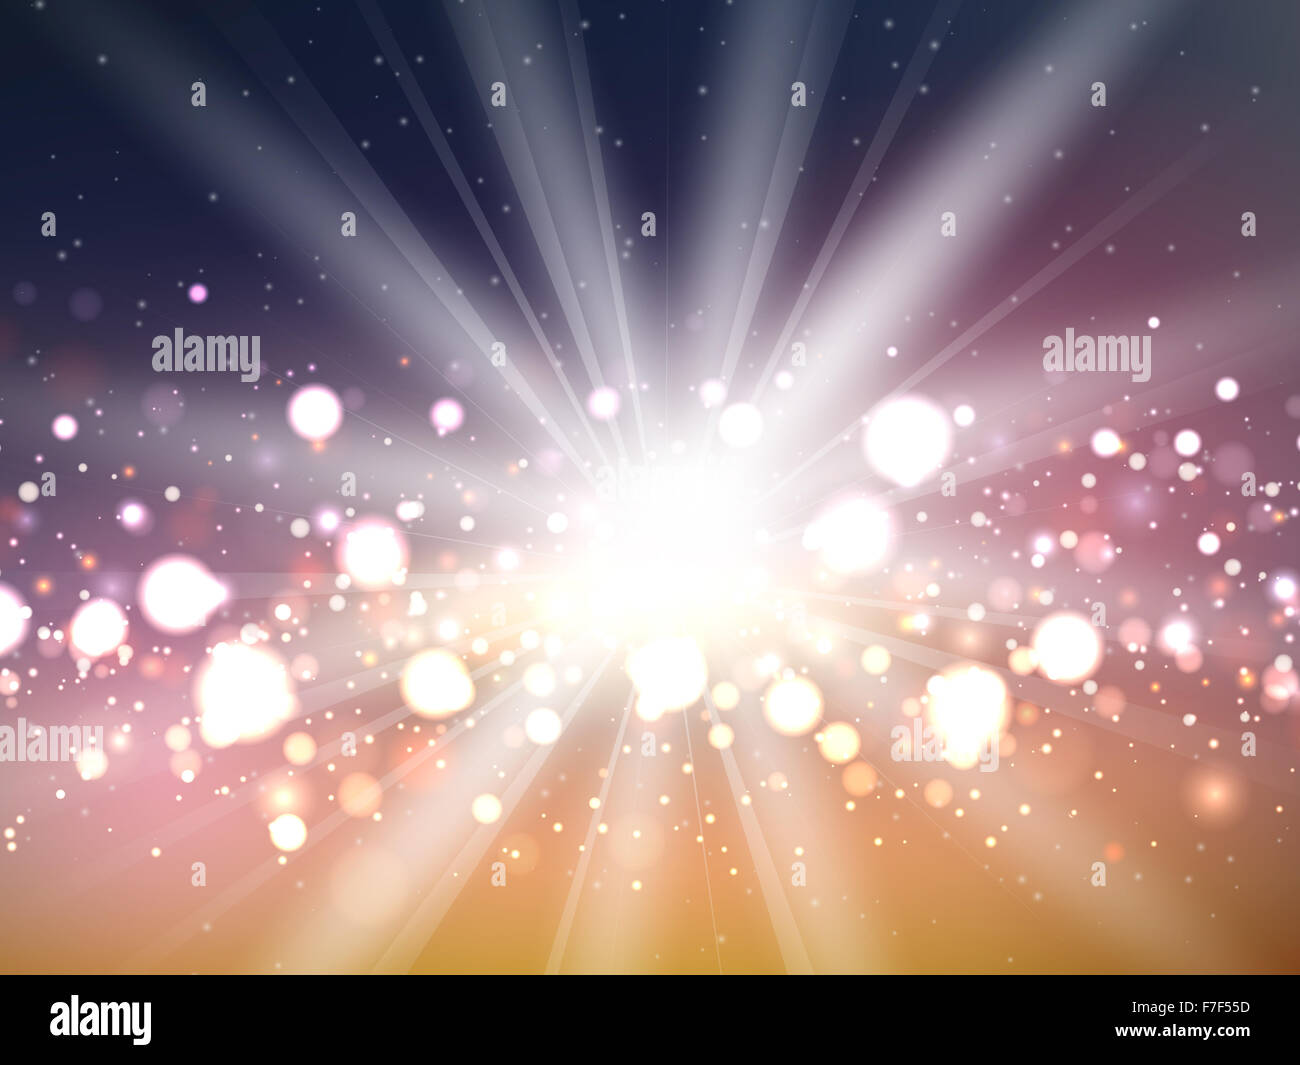 Abstract background with starburst design Stock Photo